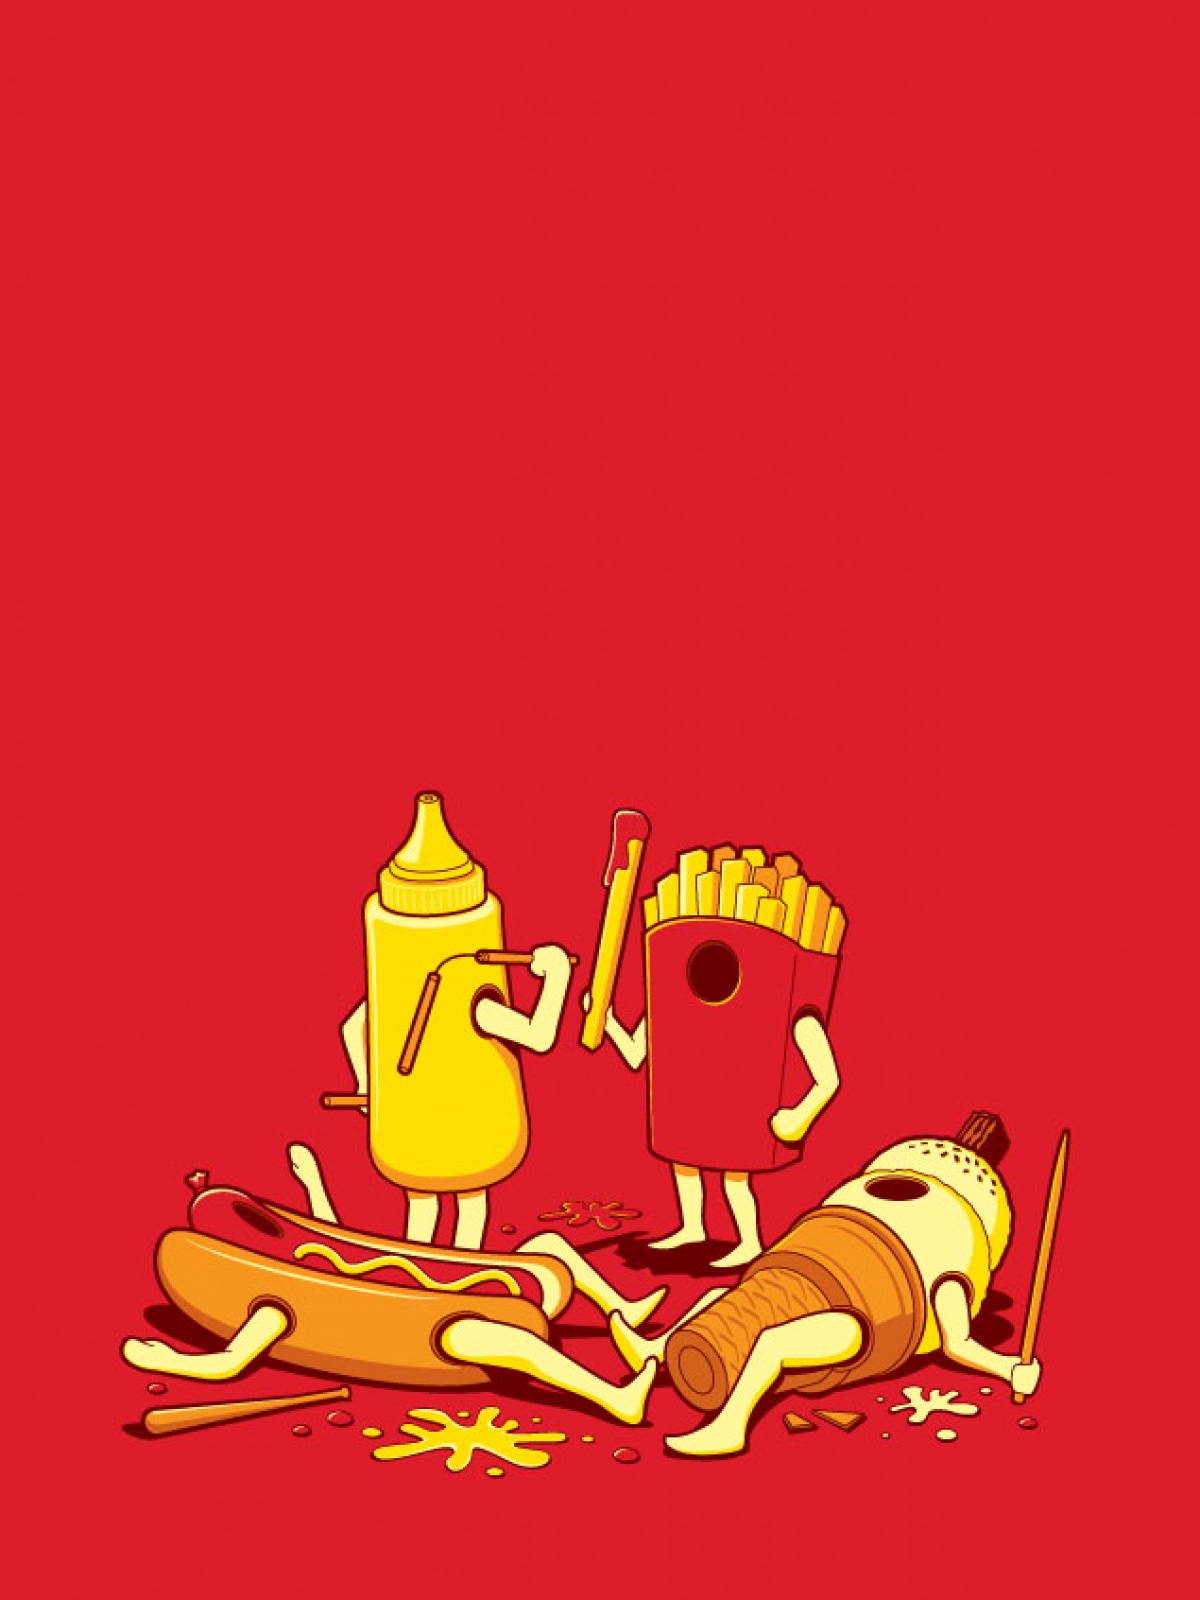 Fast Food Battle Android Wallpaper free download